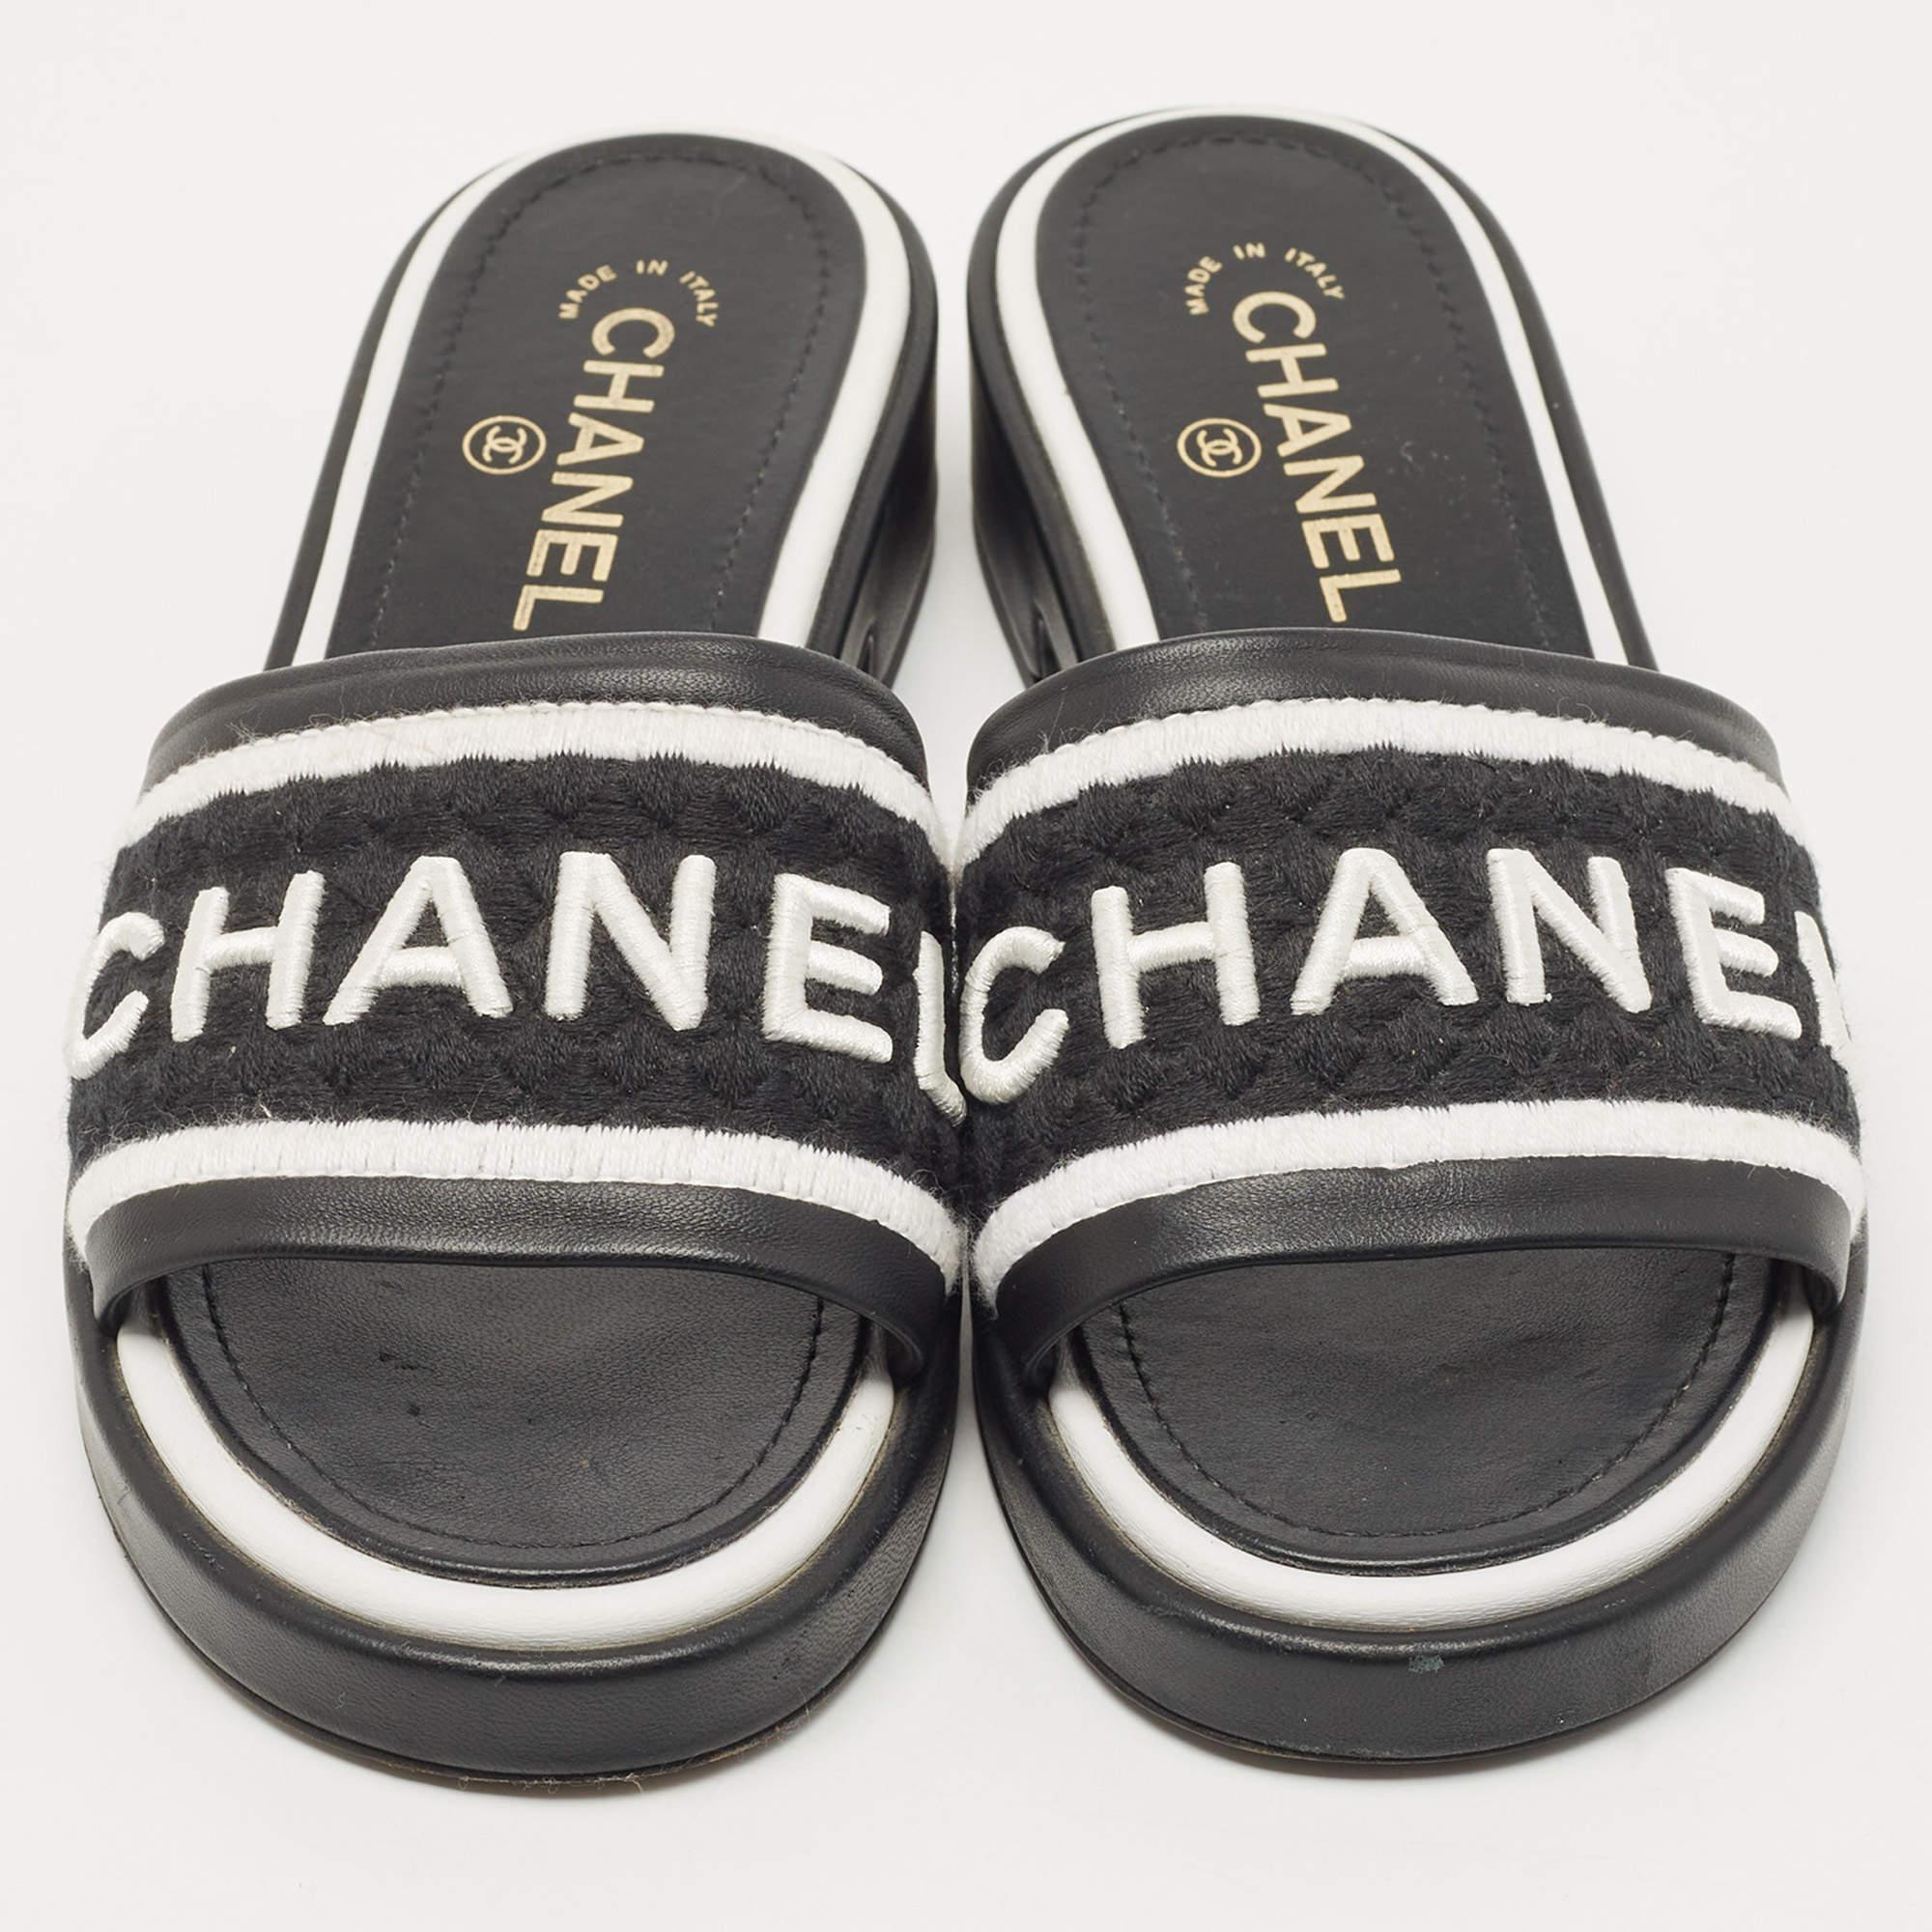 These lovely Chanel sandals will bring you the right amount of style and shine. They feature brand name-detailed straps on the vamps made from leather & canvas and features durable soles. They are pretty and easy to flaunt.

Includes: Original